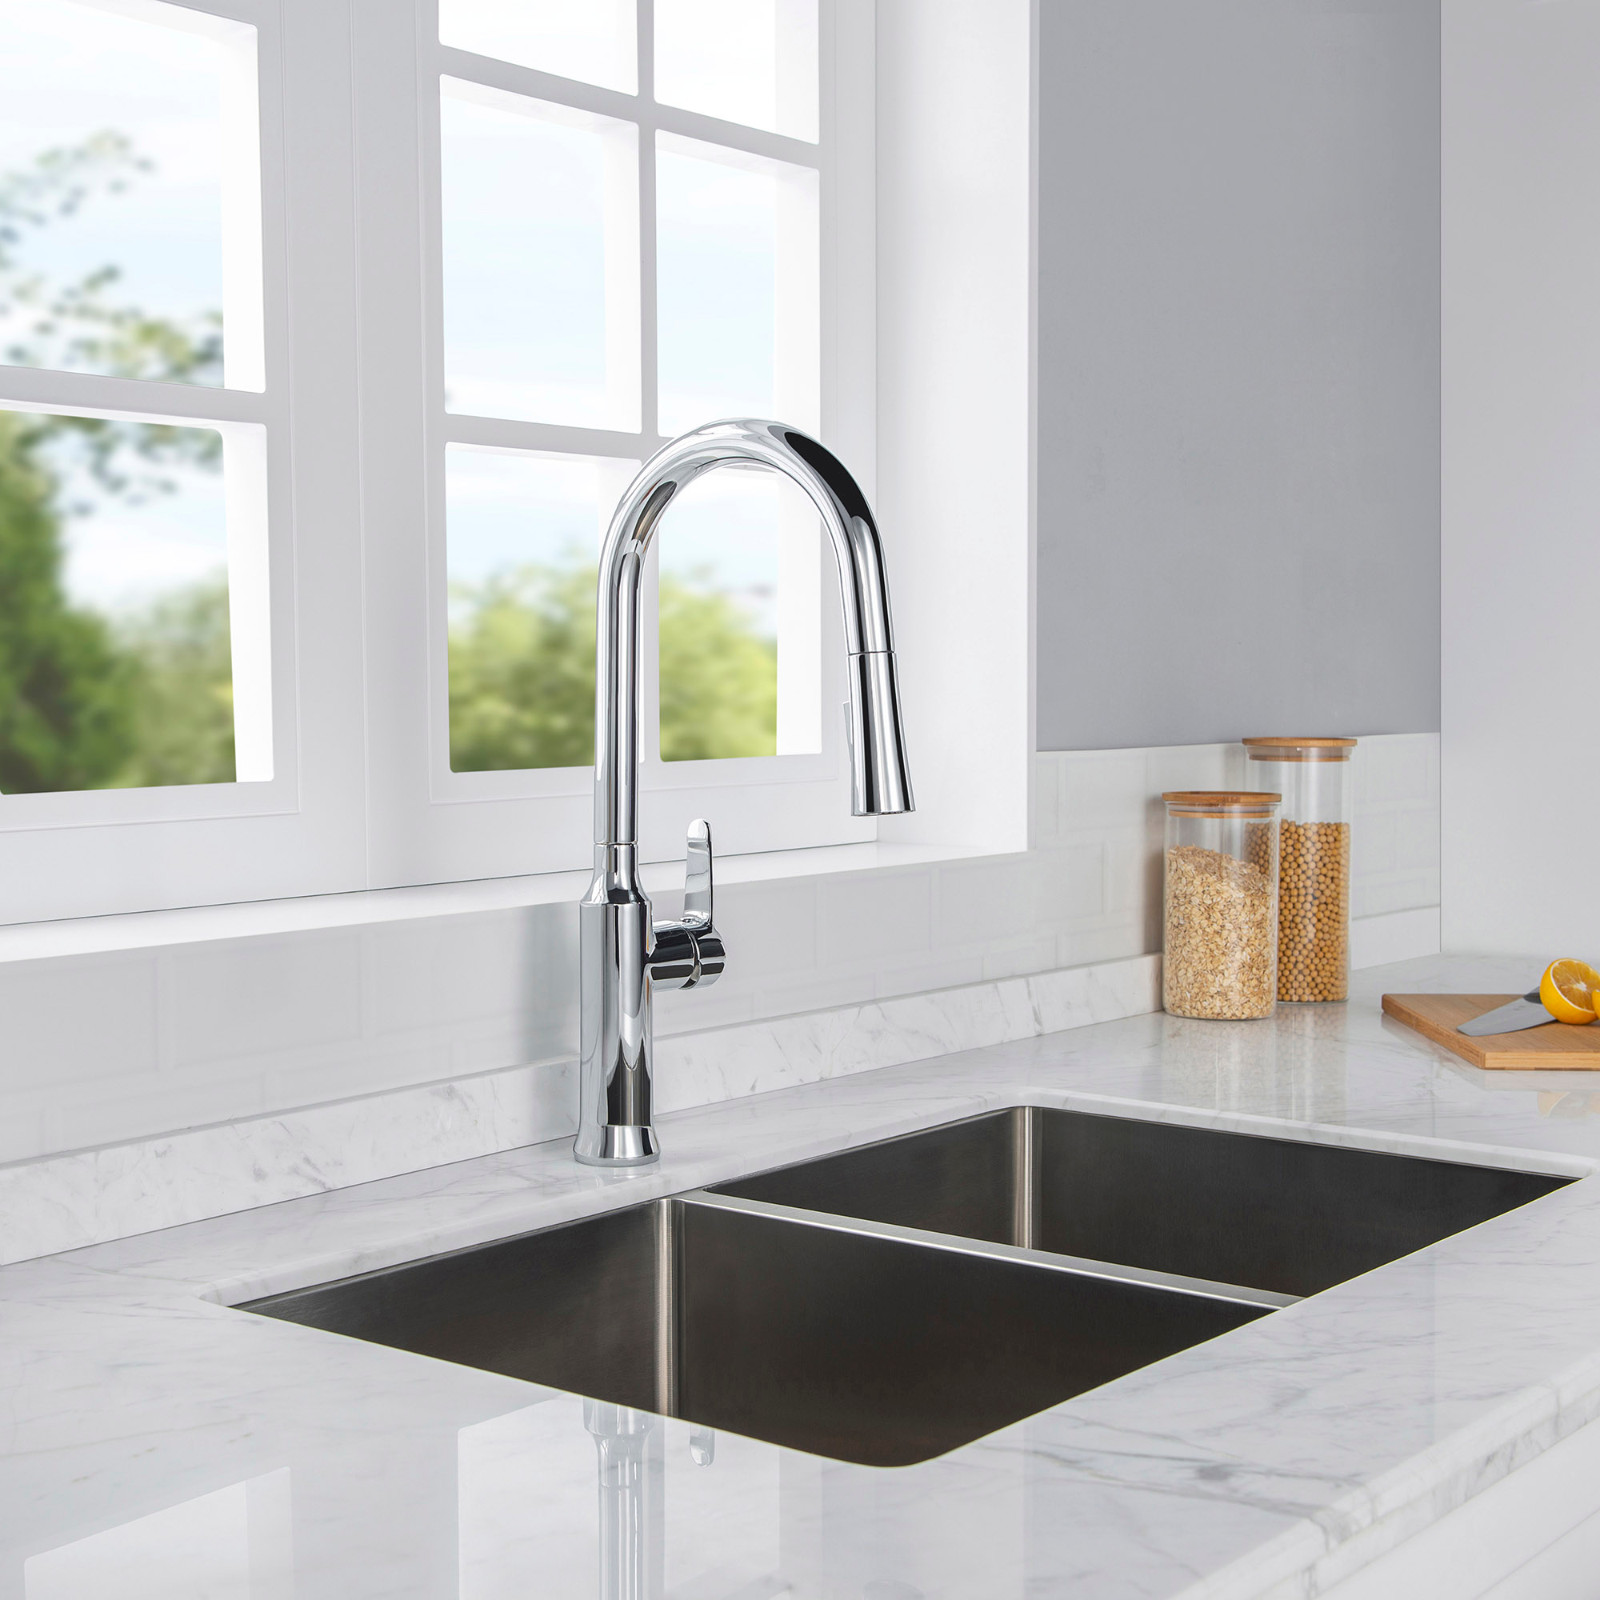  WOODBRIDGE WK030102CH Stainless Steel Single Handle Pre-Rinse Kitchen Faucet with Pull Down Sprayer, Chrome Finish_9436